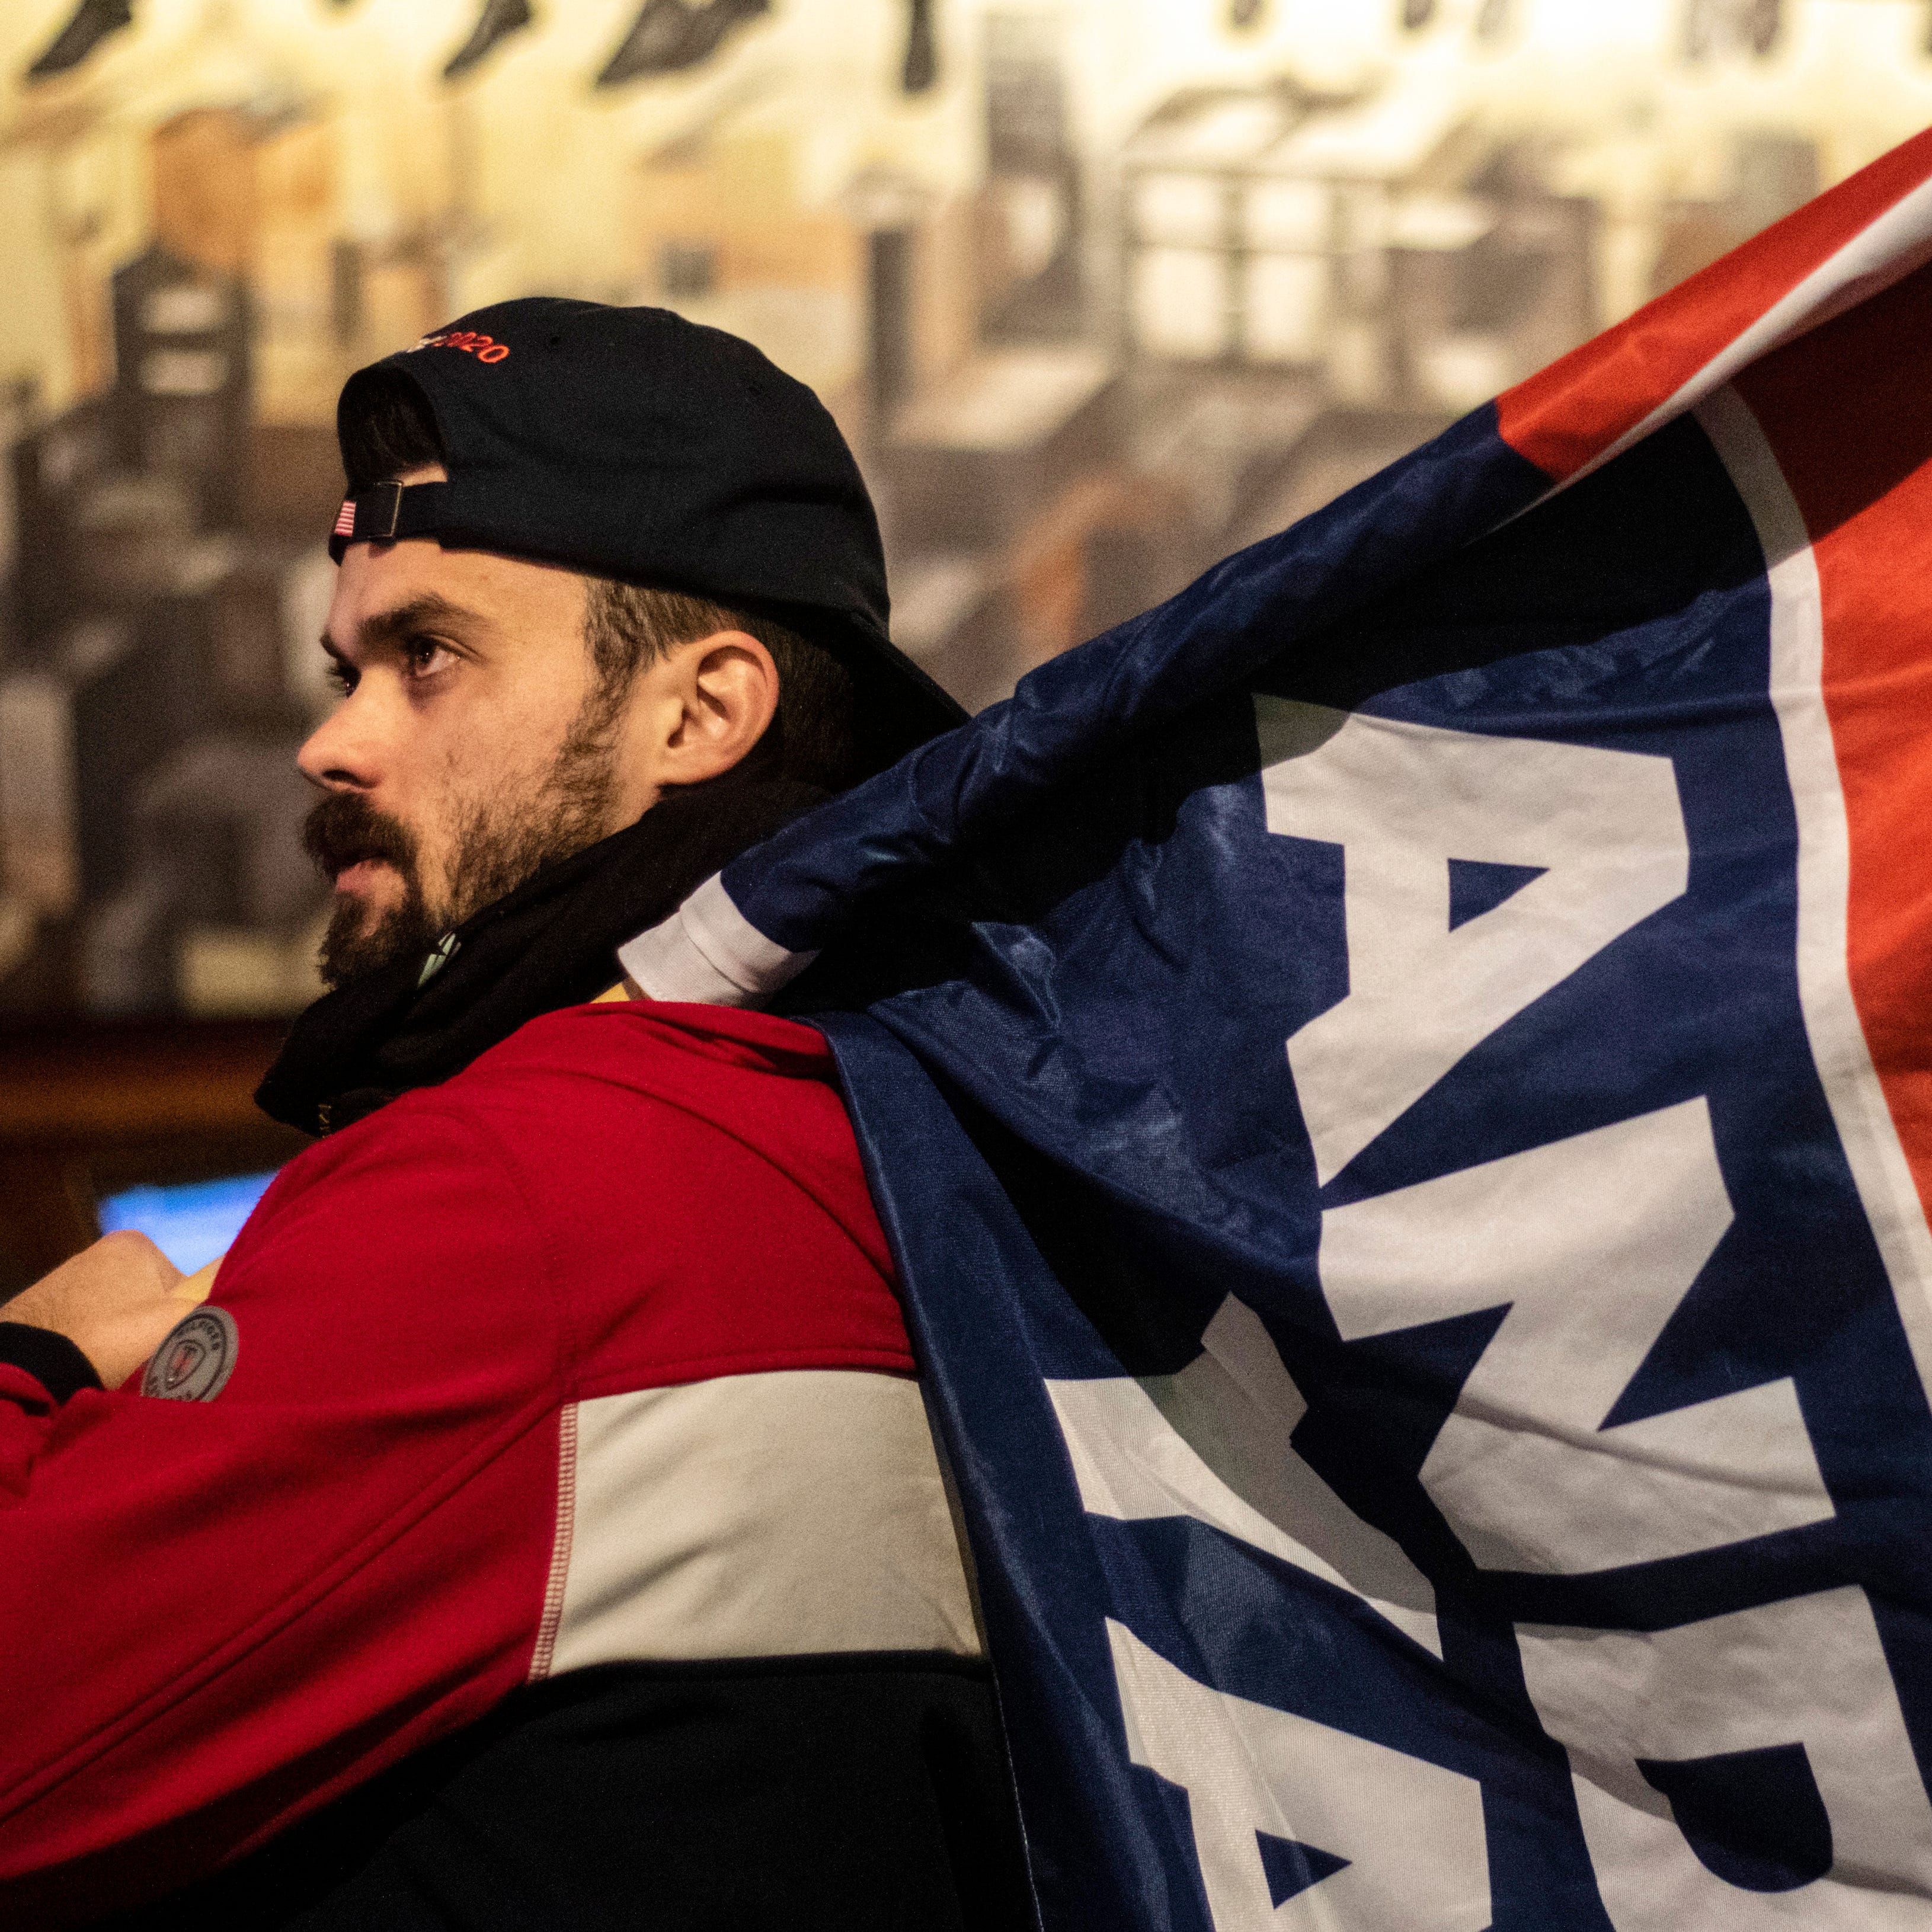 Tully Baker, of New Hampshire, carries a flag in support of Democratic presidential candidate Andrew Yang during a watch party for the CNN/Des Moines Register Democratic Presidential Debate, Tuesday, Jan. 14, 2020, at Papa Keno's Pizzeria in Des Moines, Iowa.